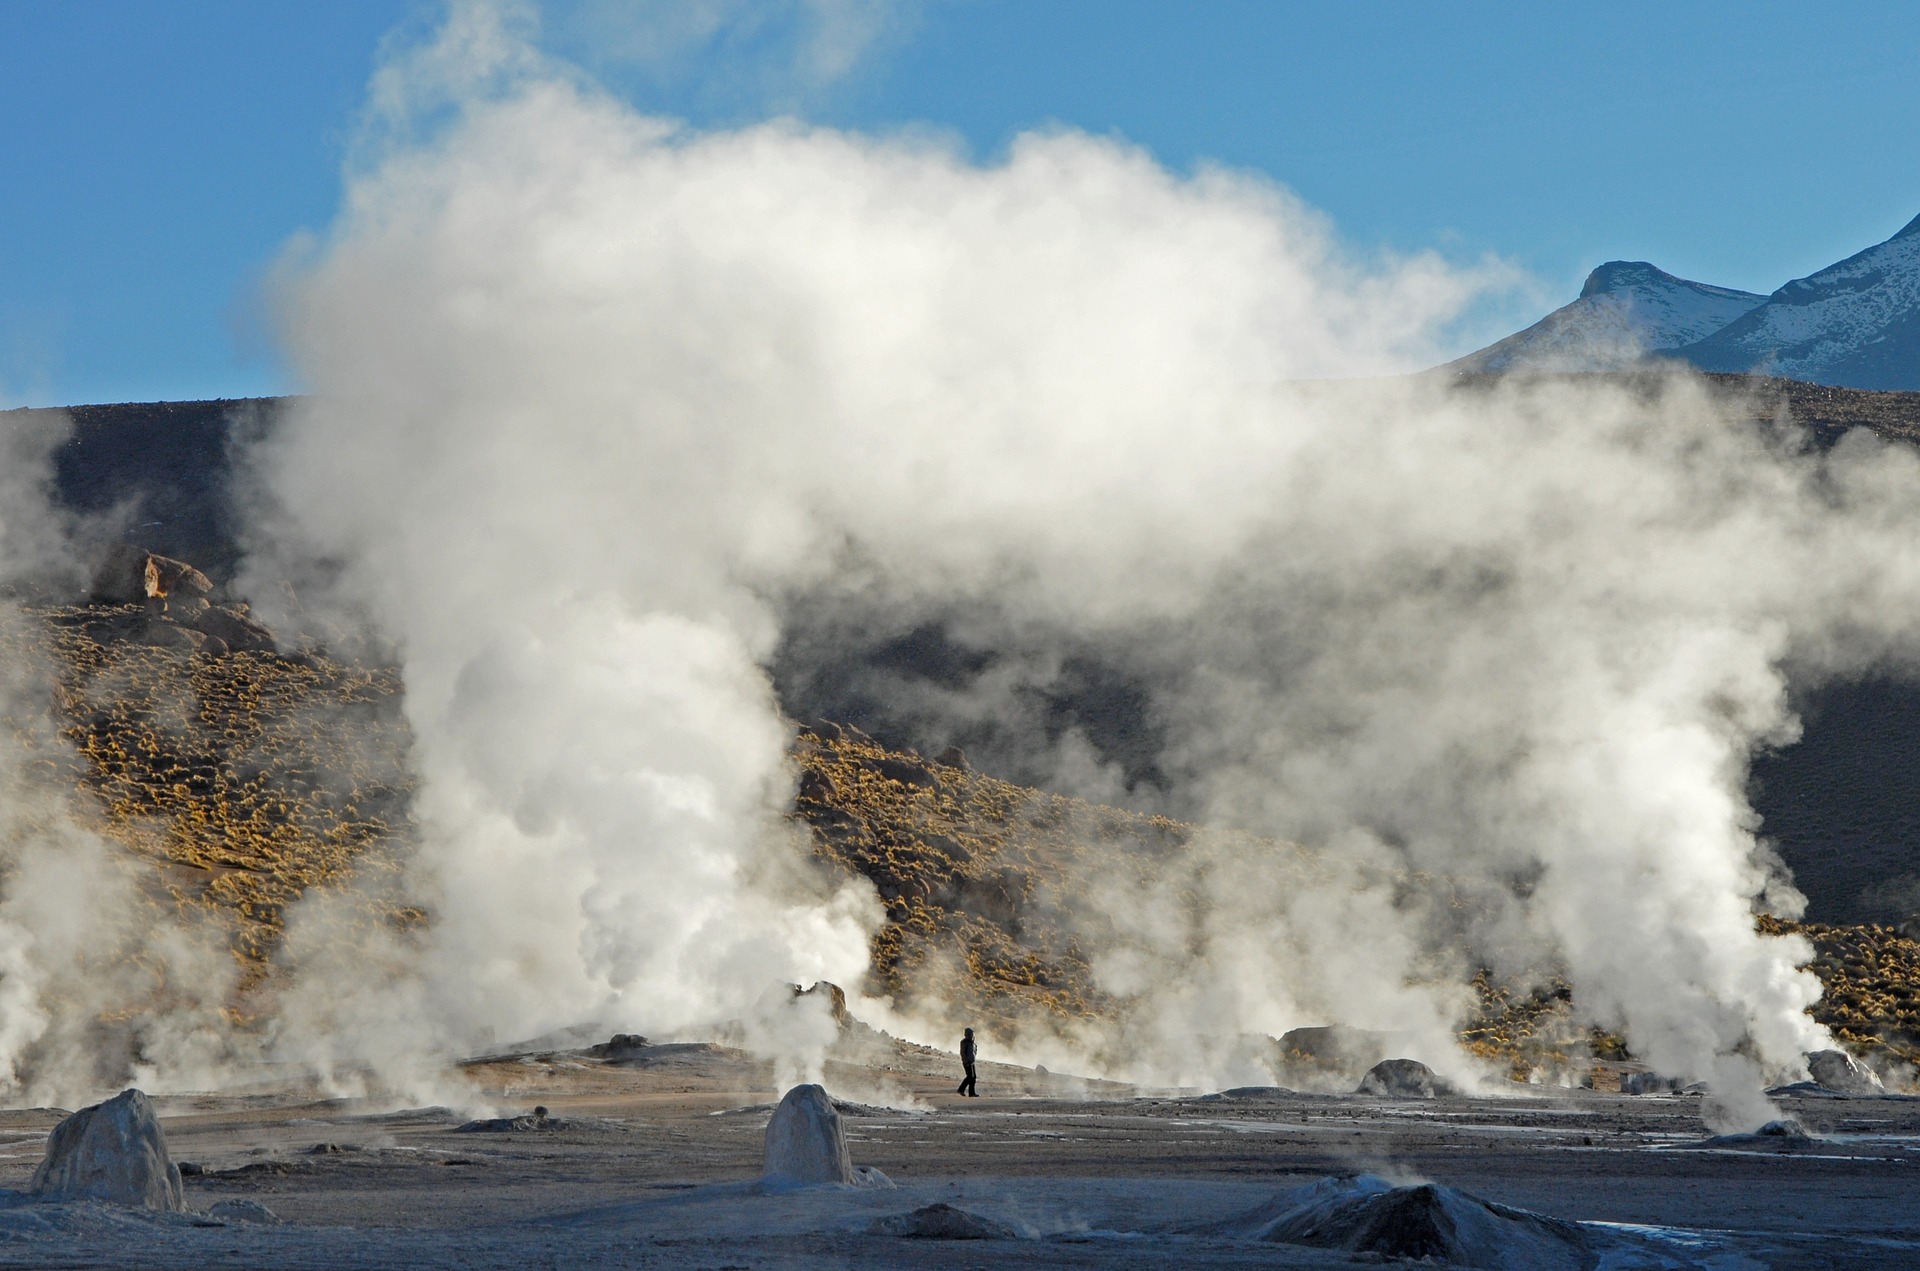 Clouds of steam billowing from geysers in front of a range of hills